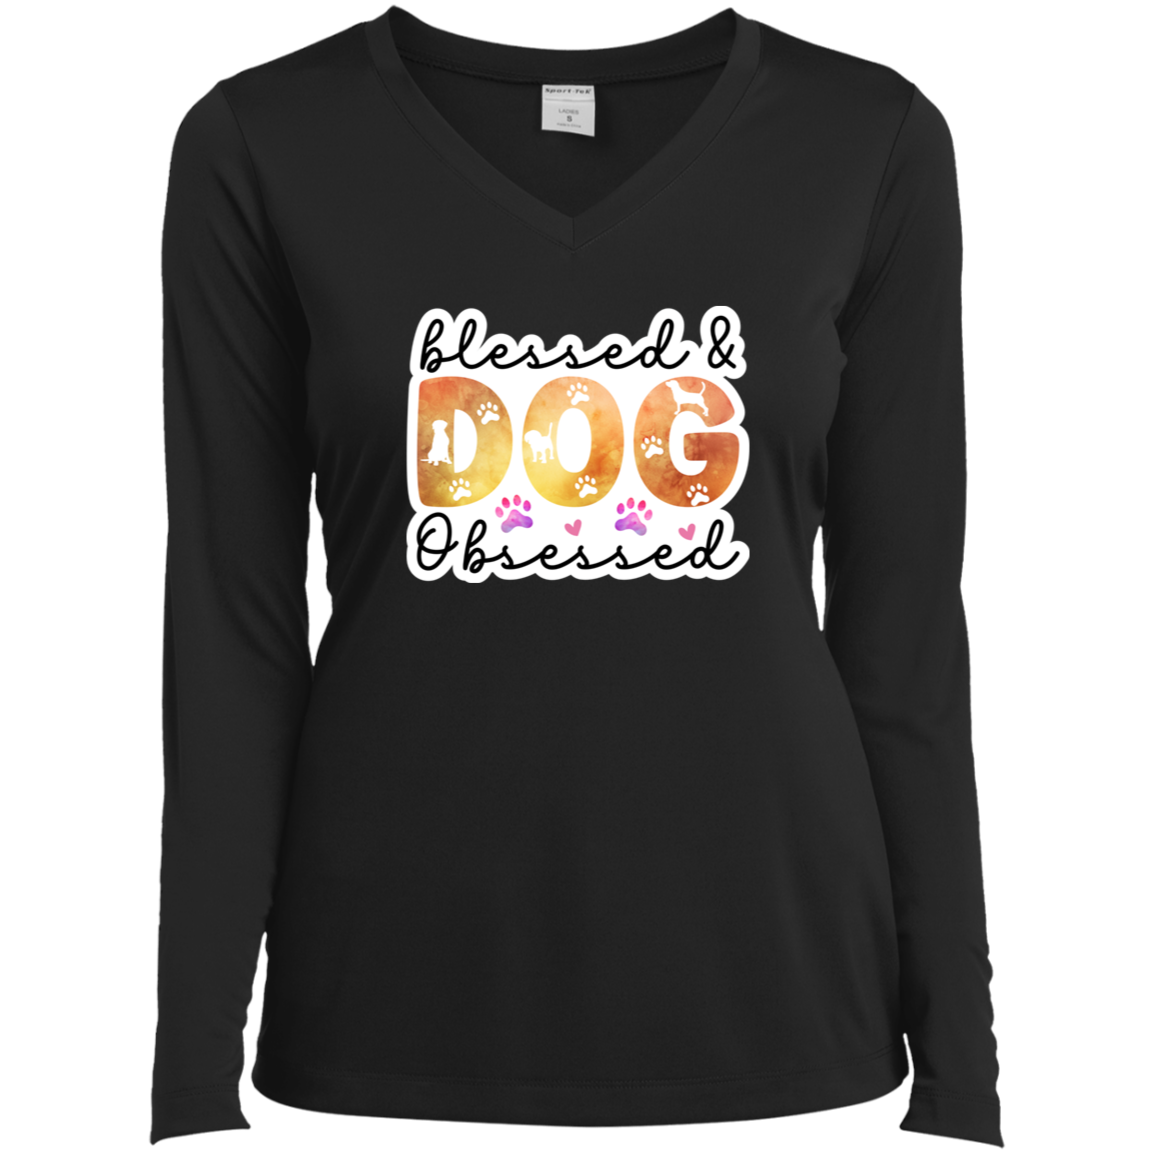 Blessed & Dog Obsessed Watercolor Ladies’ Long Sleeve Performance V-Neck Tee